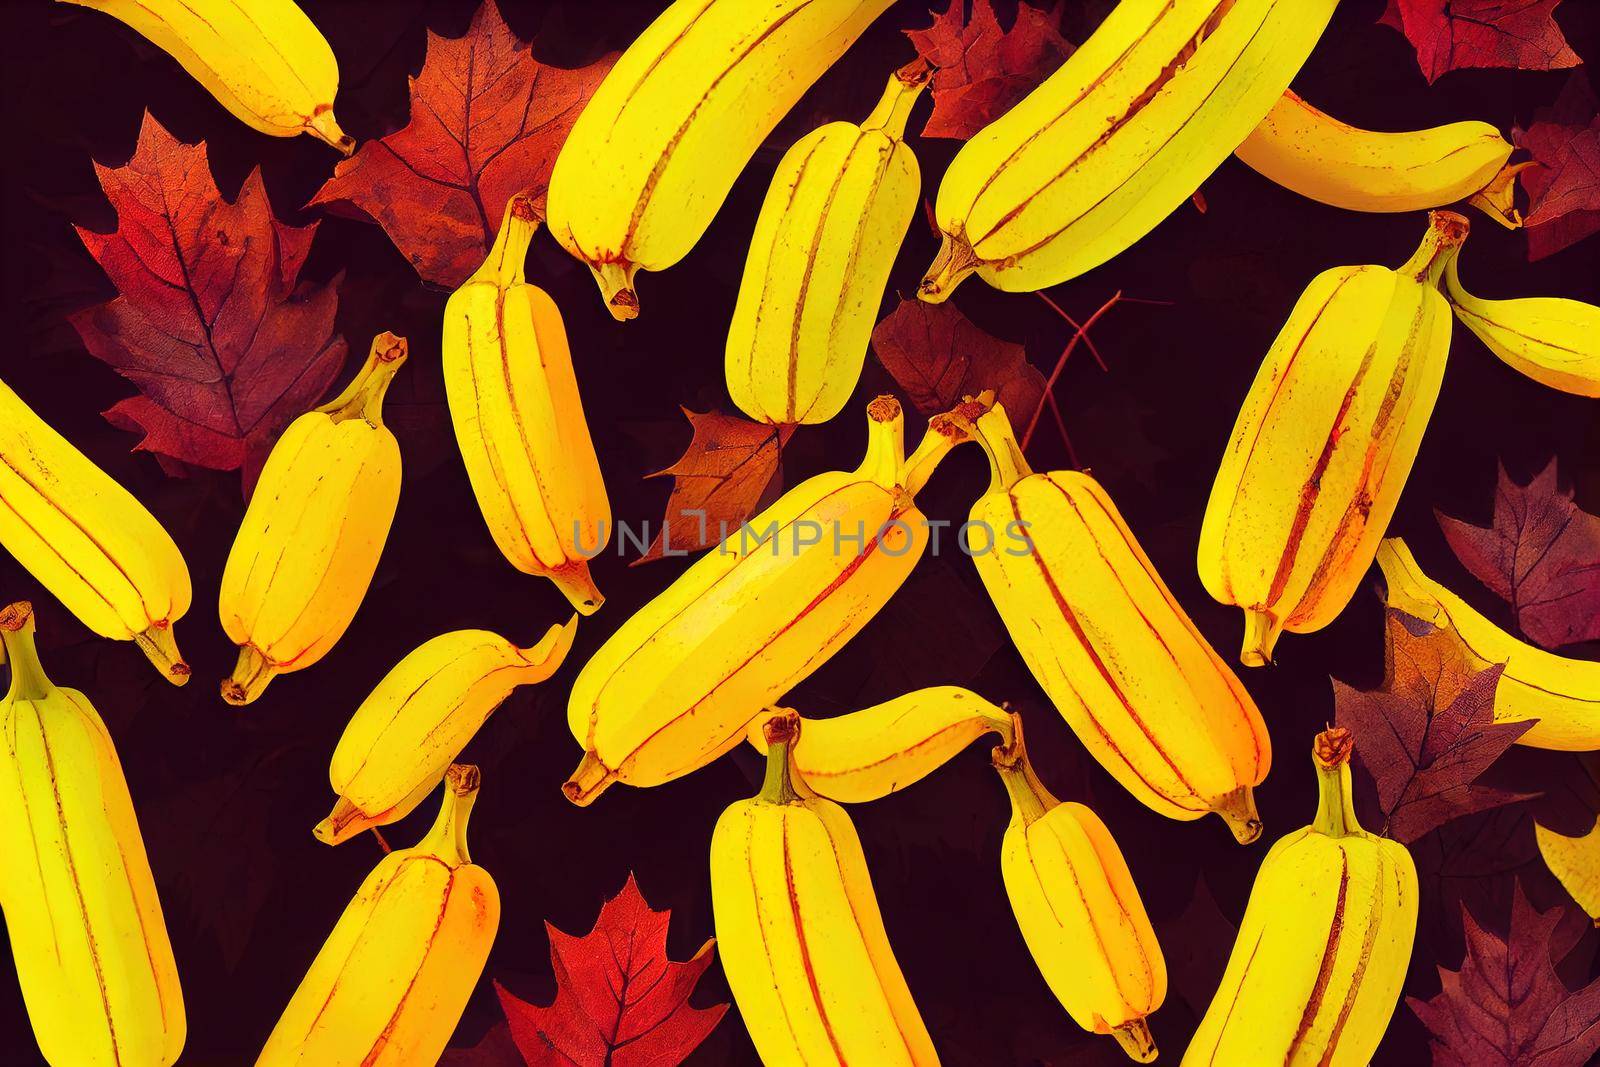 Ripe yellow bananas in a wooden box in autumn nature, among red leaves from trees, a contrasting composition of fruits, a comfortable season, natural food and an unusual combination , anime style